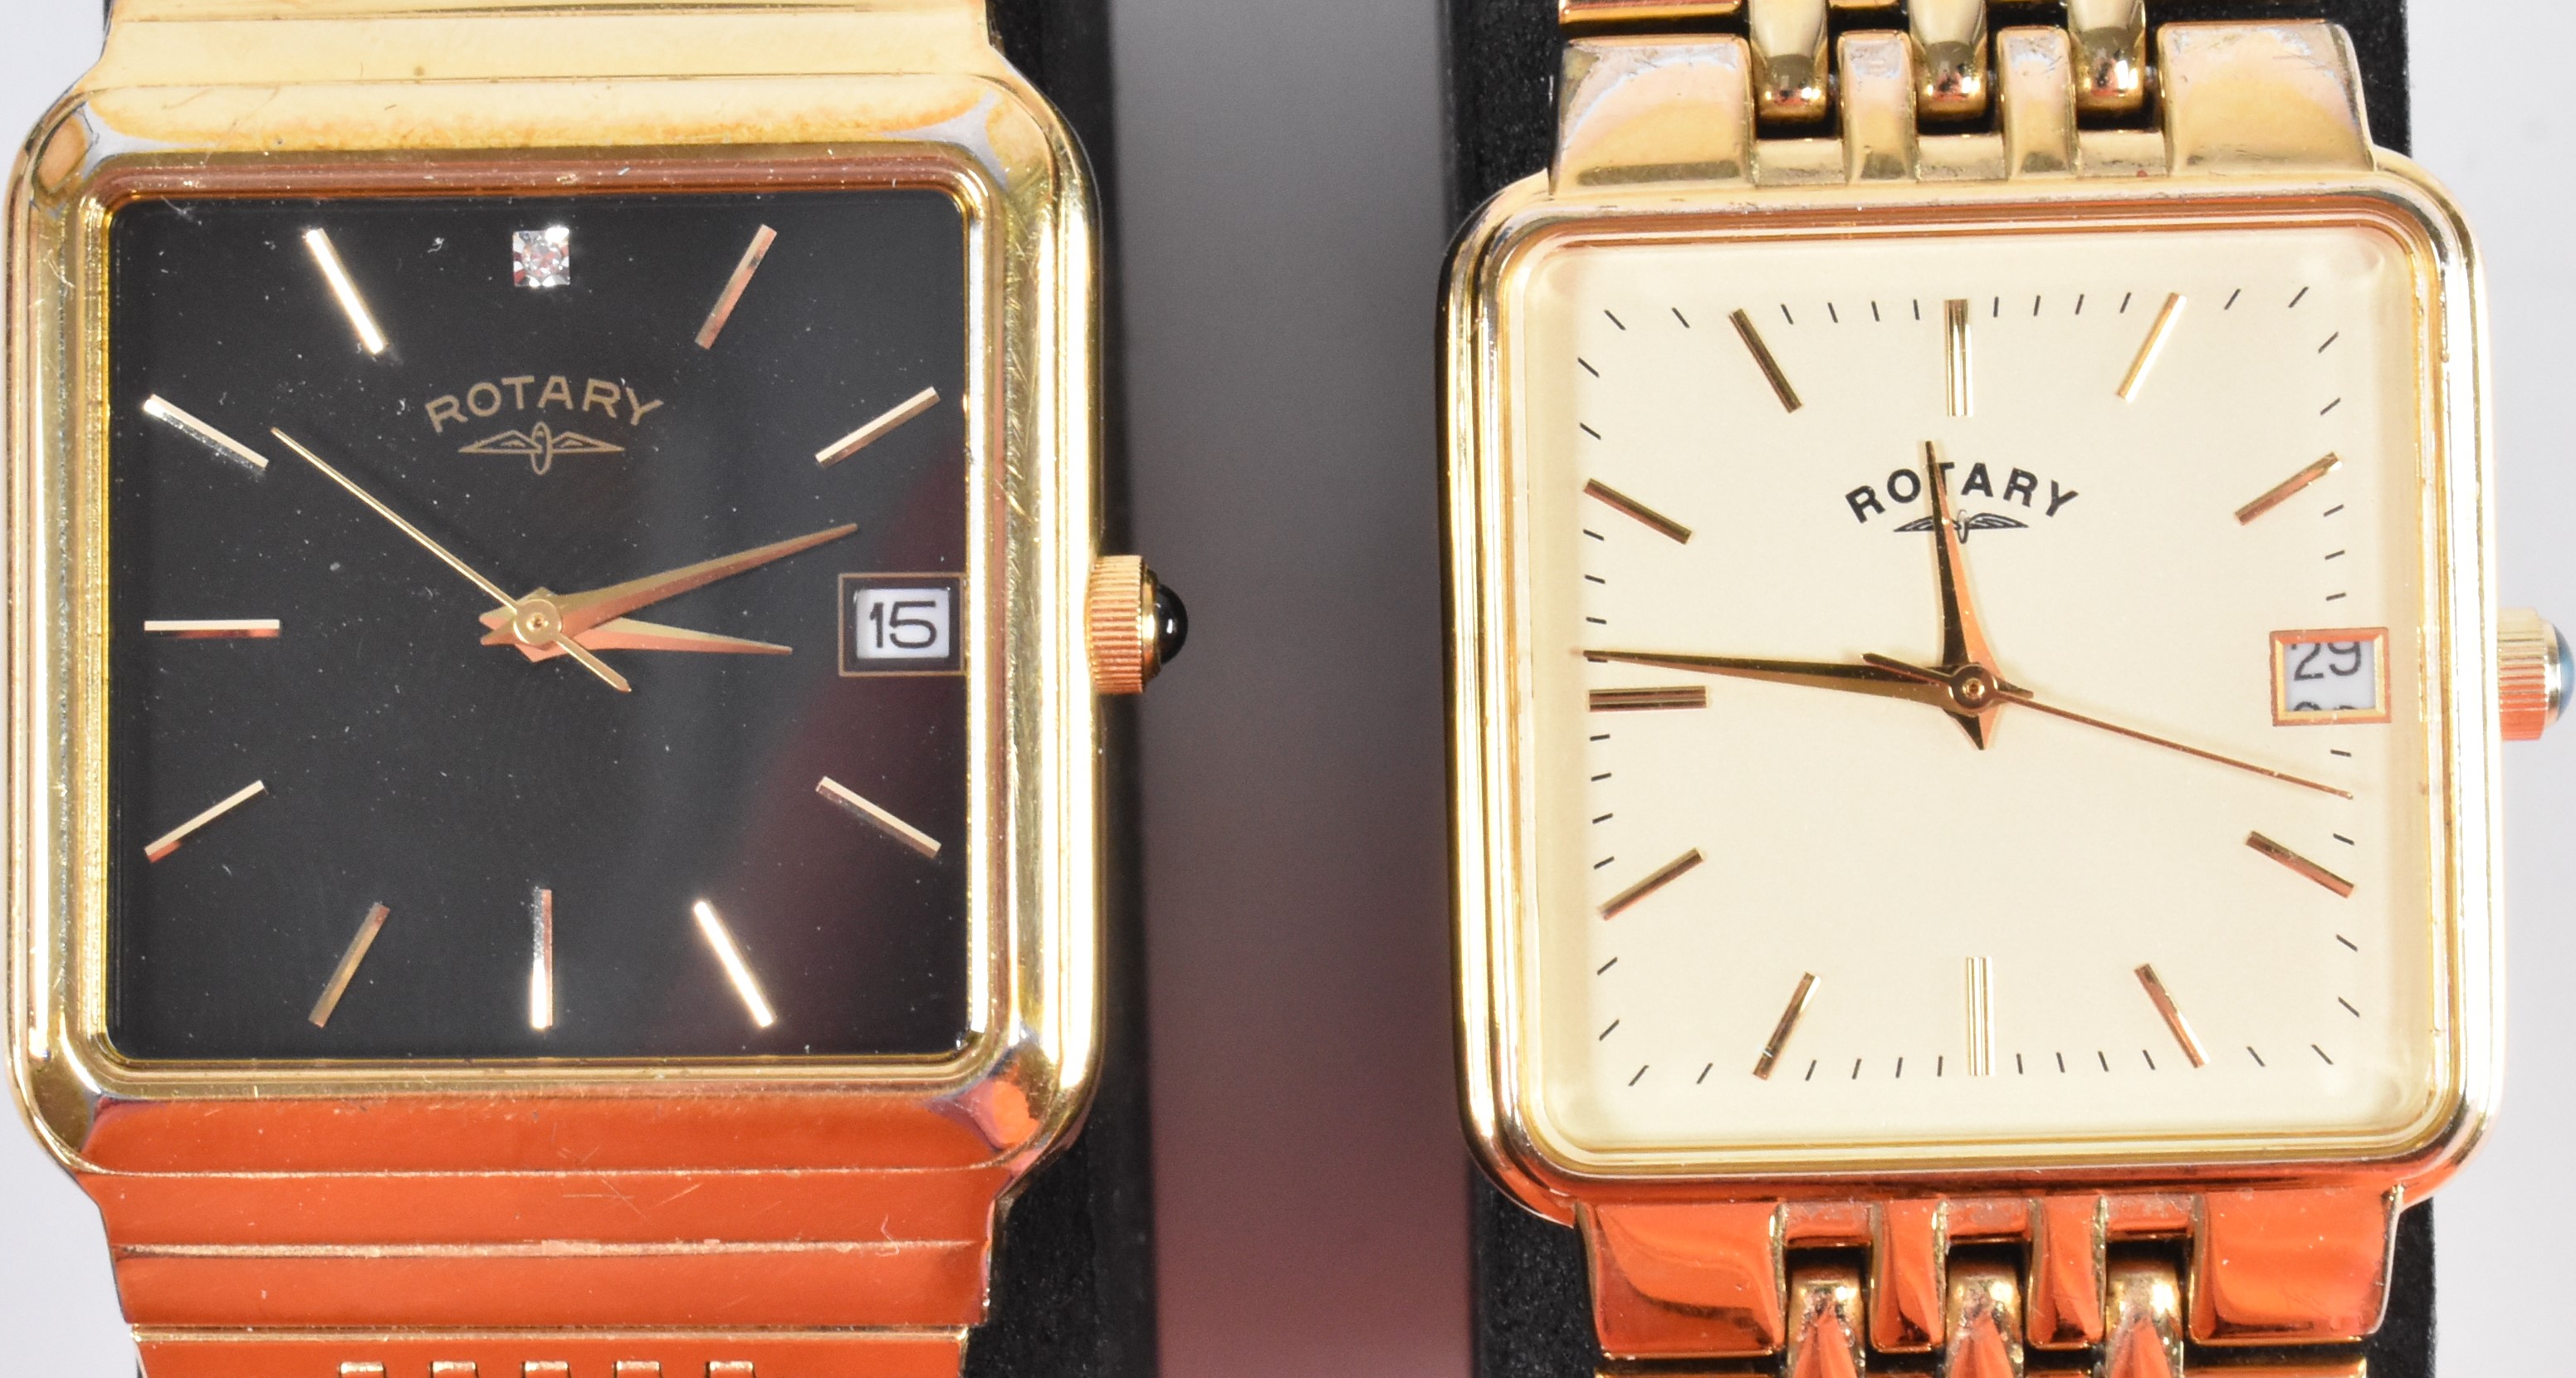 TWO ROTARY GENTS WRIST WATCHES - Image 2 of 4